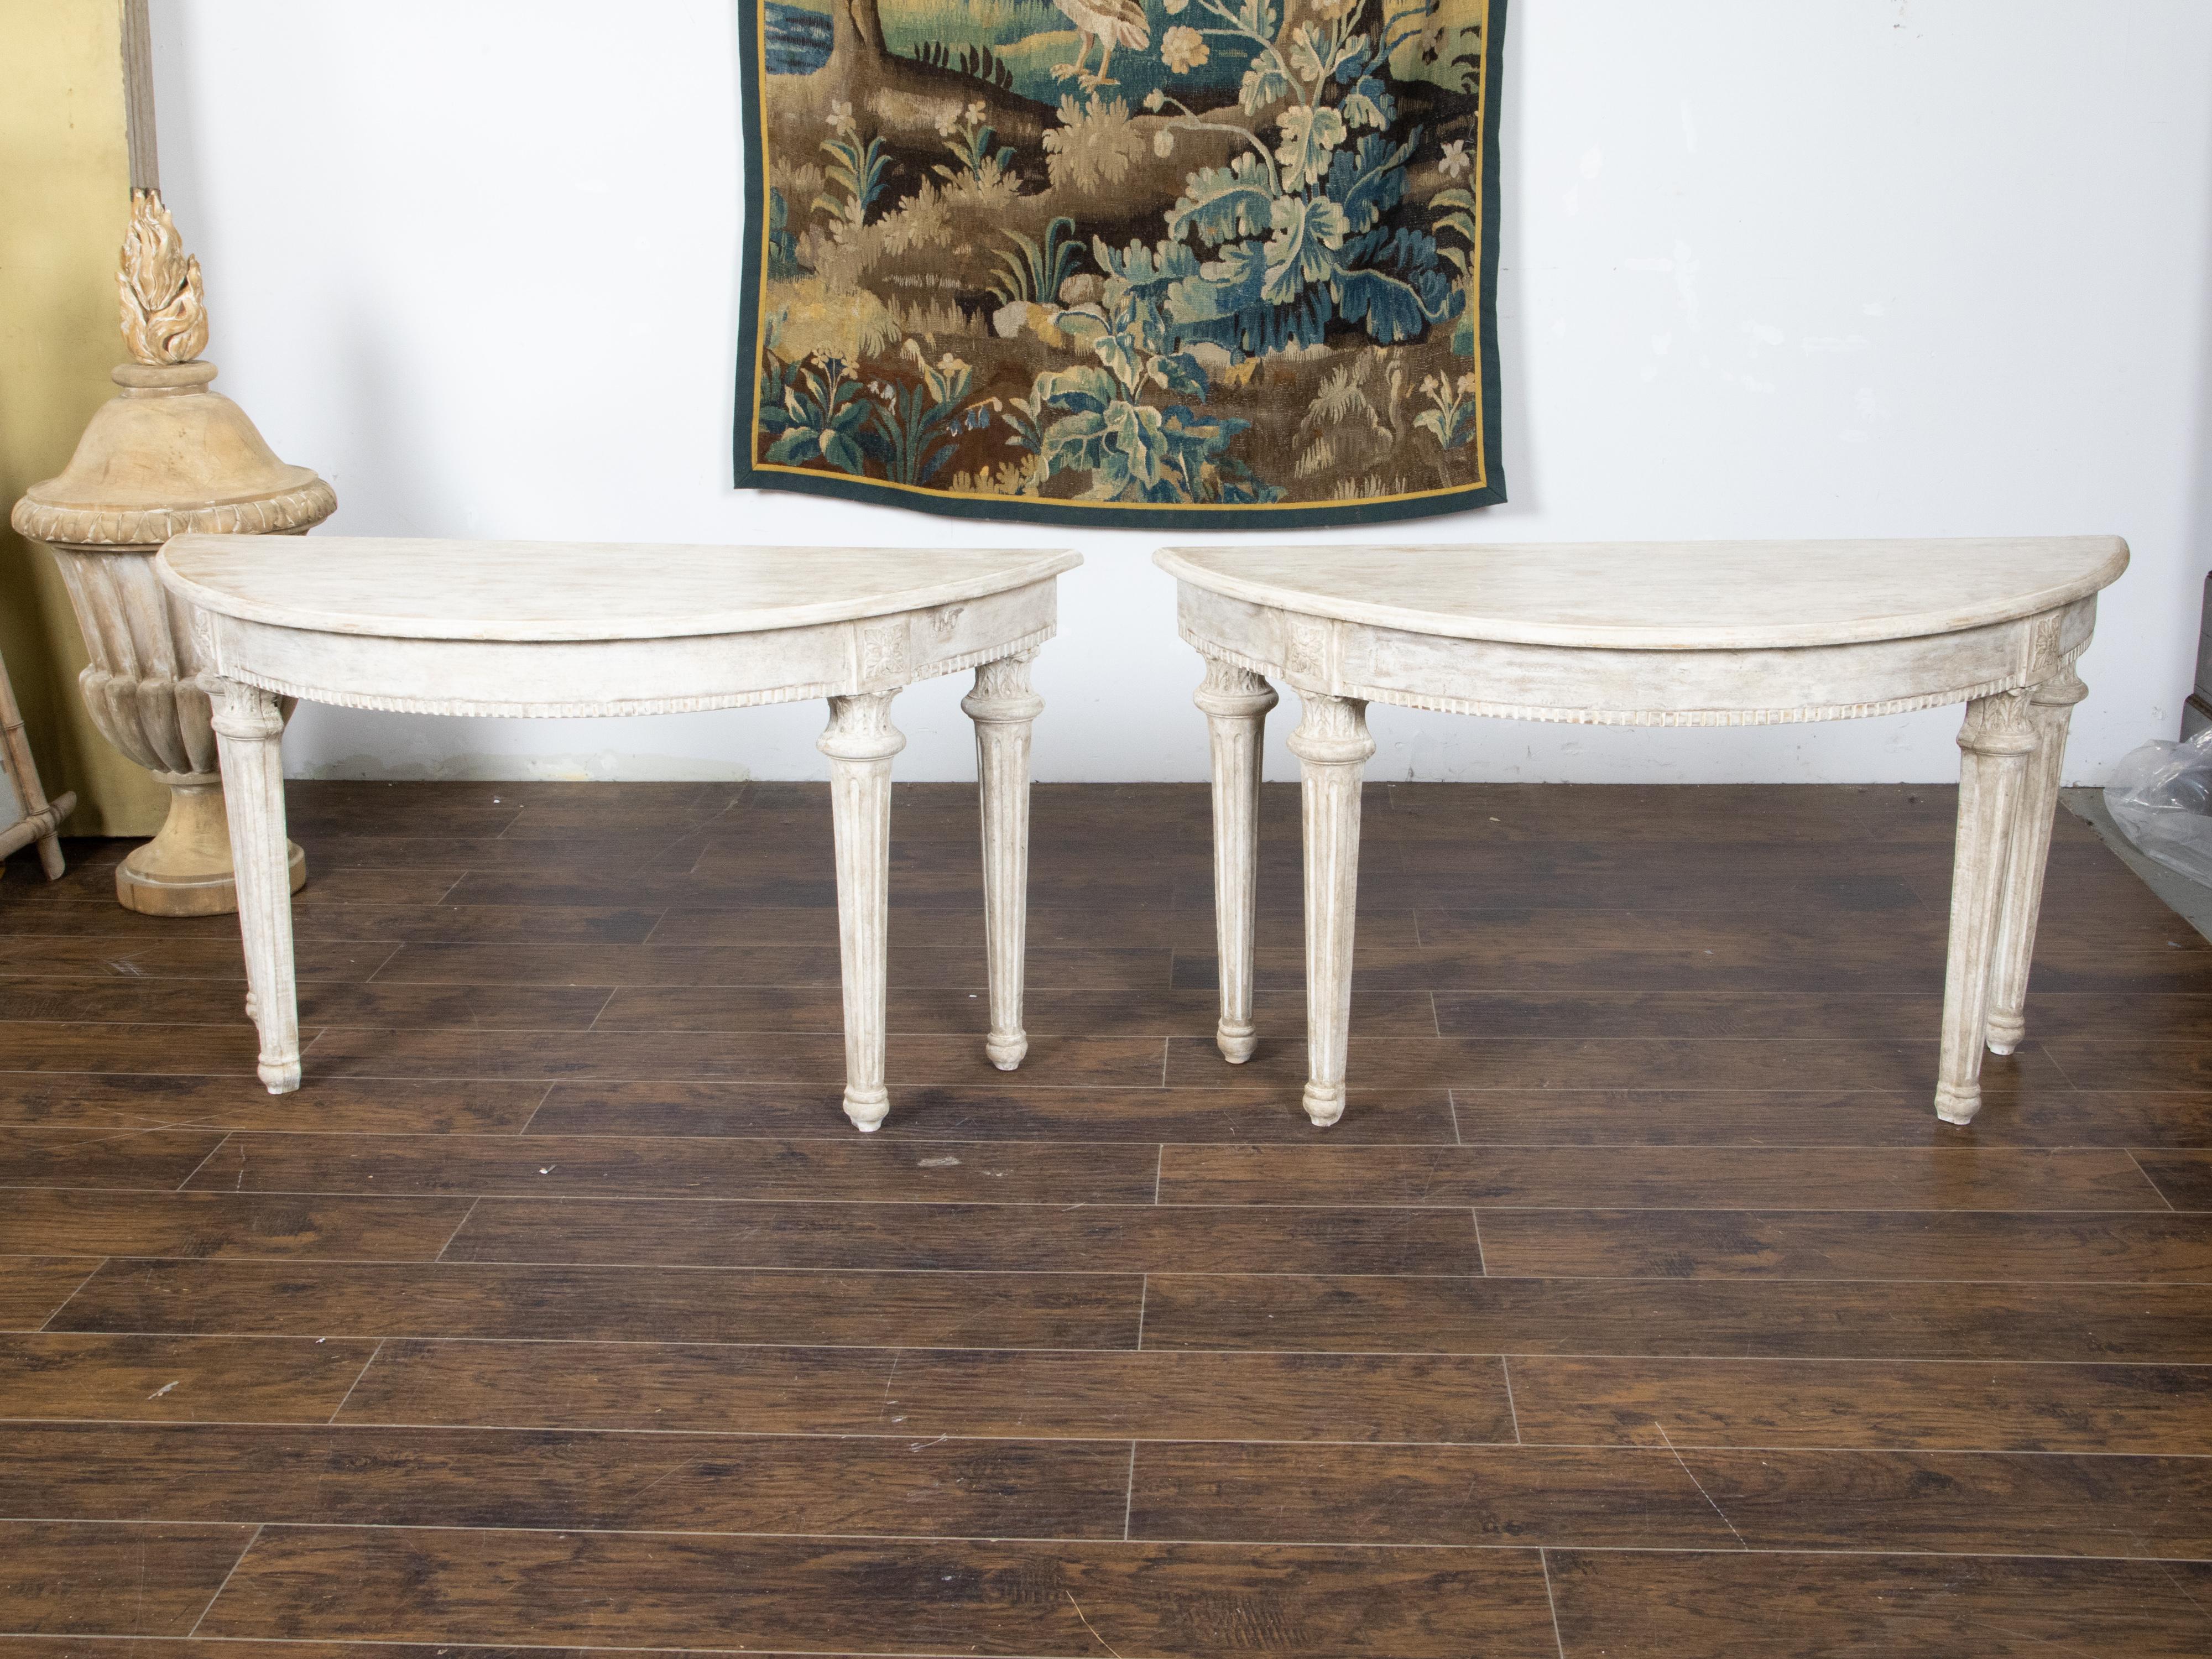 Pair of French Neoclassical Style 1880s Demilune Tables with Carved Décor For Sale 2